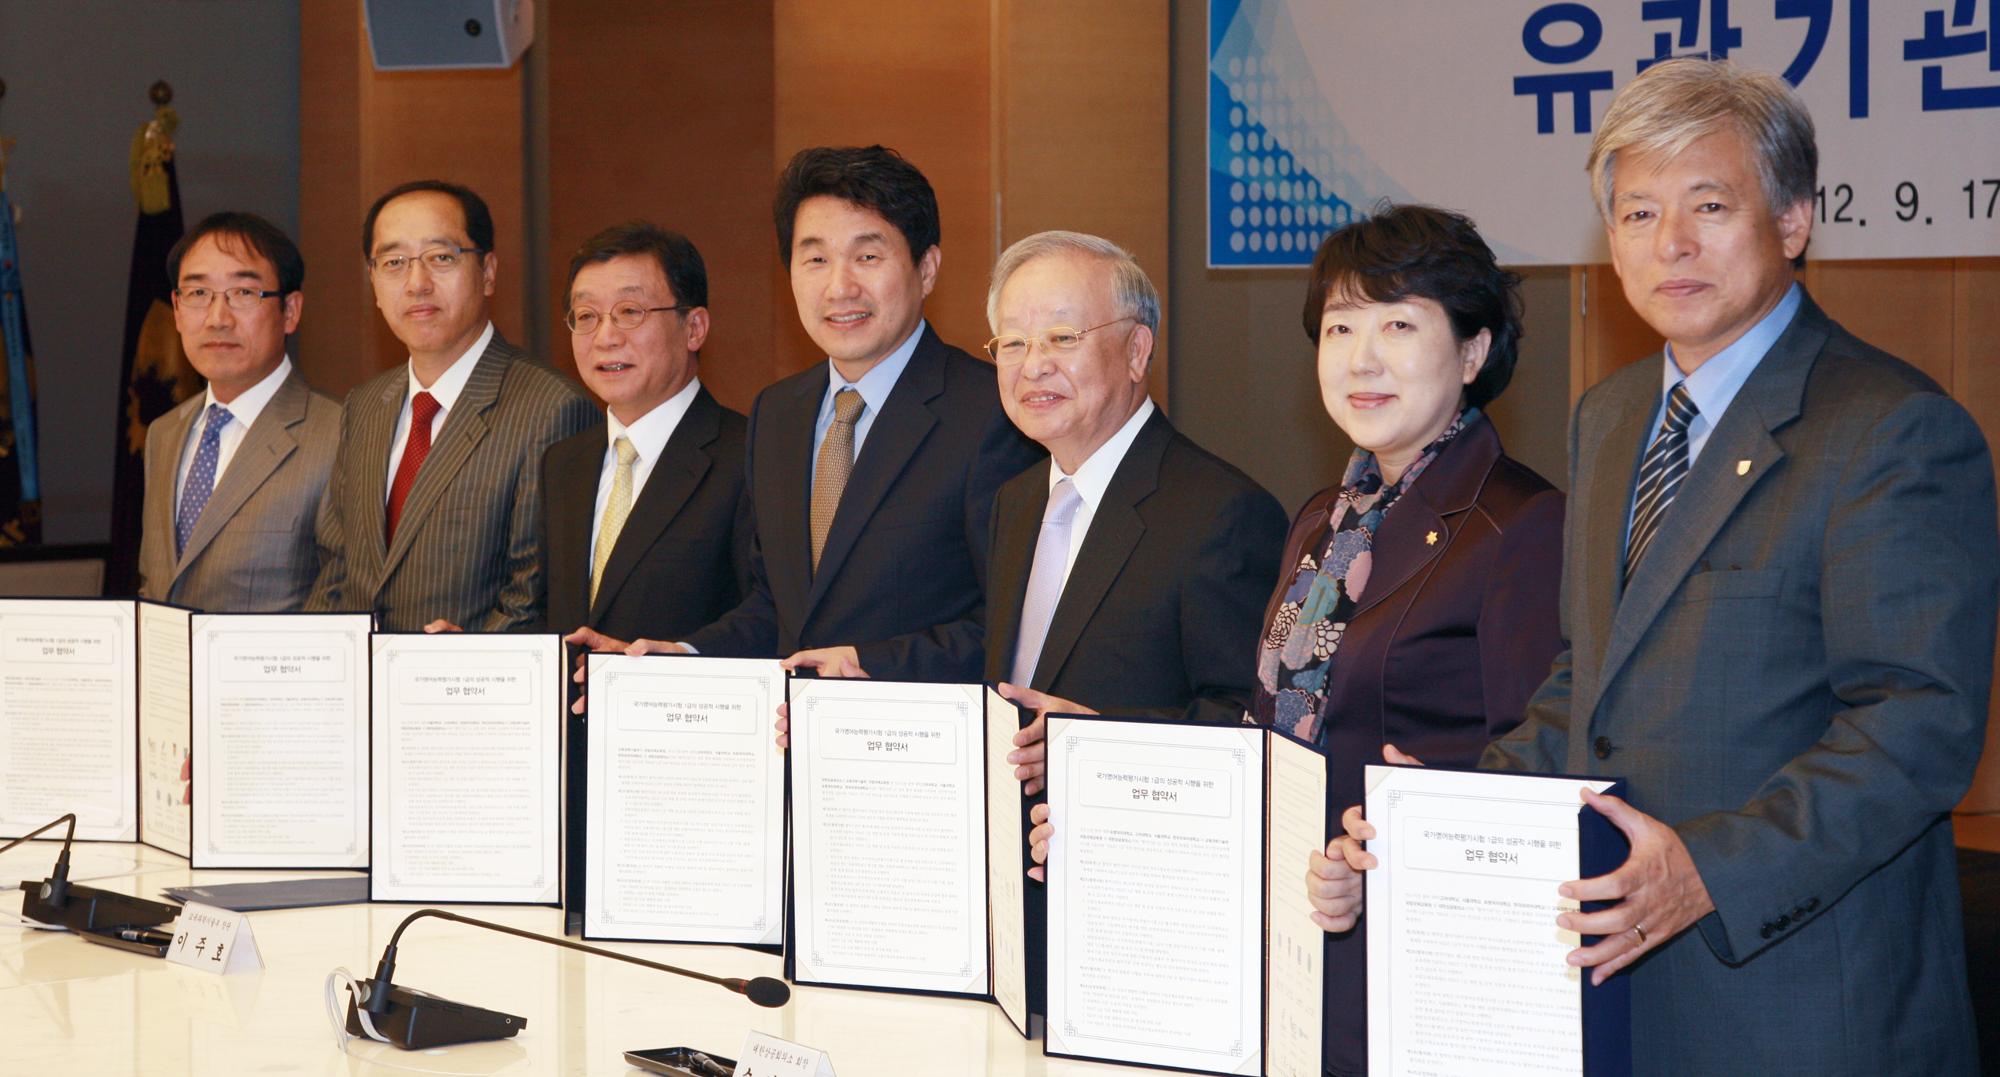 Sookmyung Concludes MOU for National English Ability Test (NEAT)